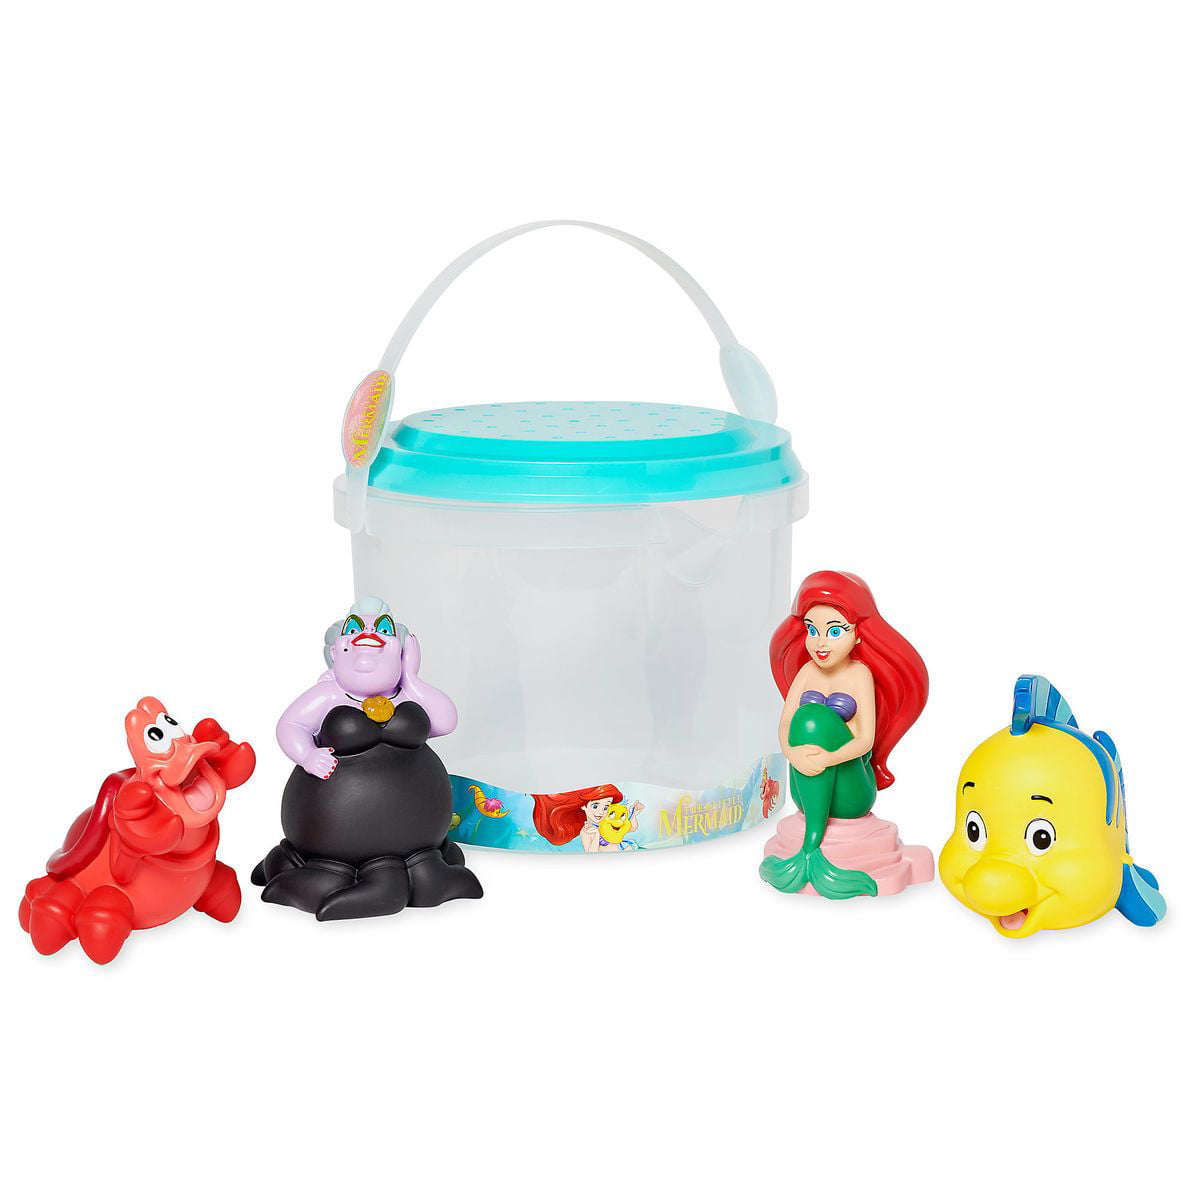 Bath Squirt Disney Baby Toy The Little Mermaid 3 Toy Water Play Bathroom Toddler